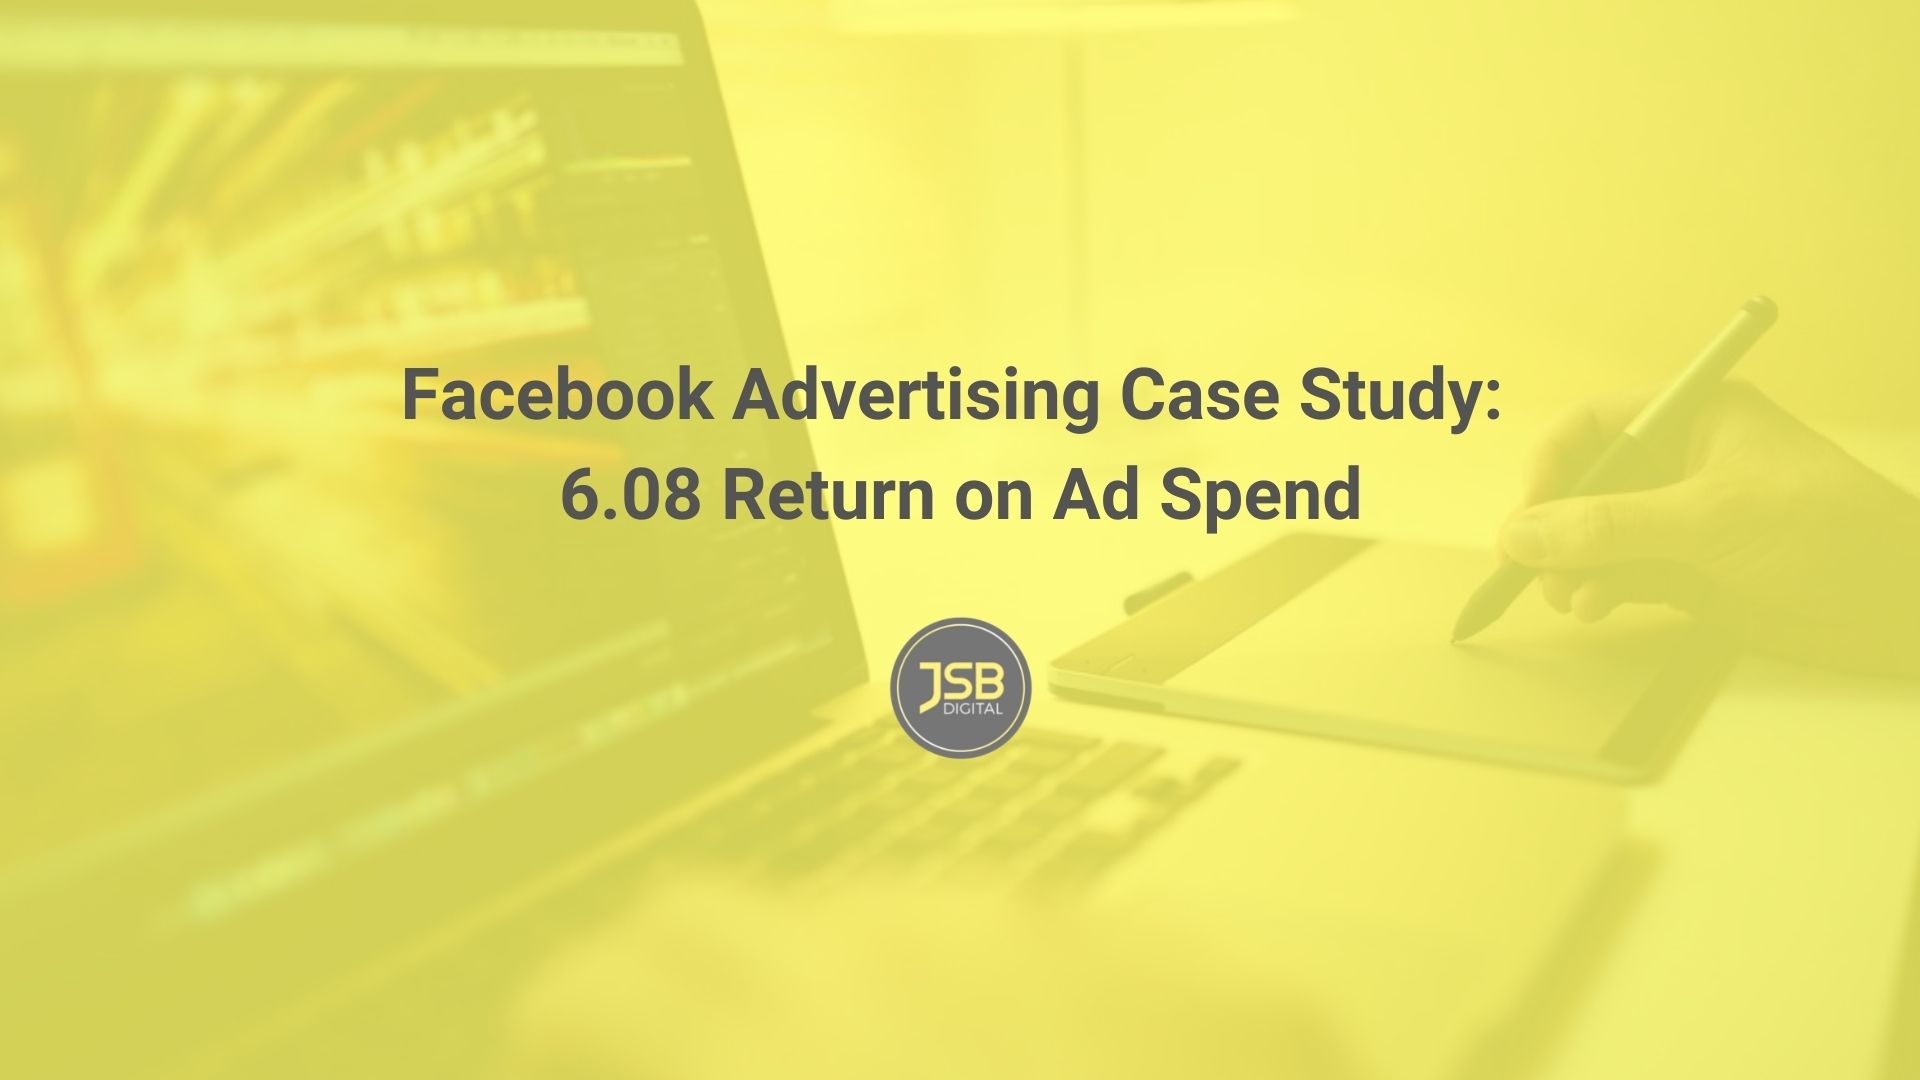 Facebook advertising case study cover image.